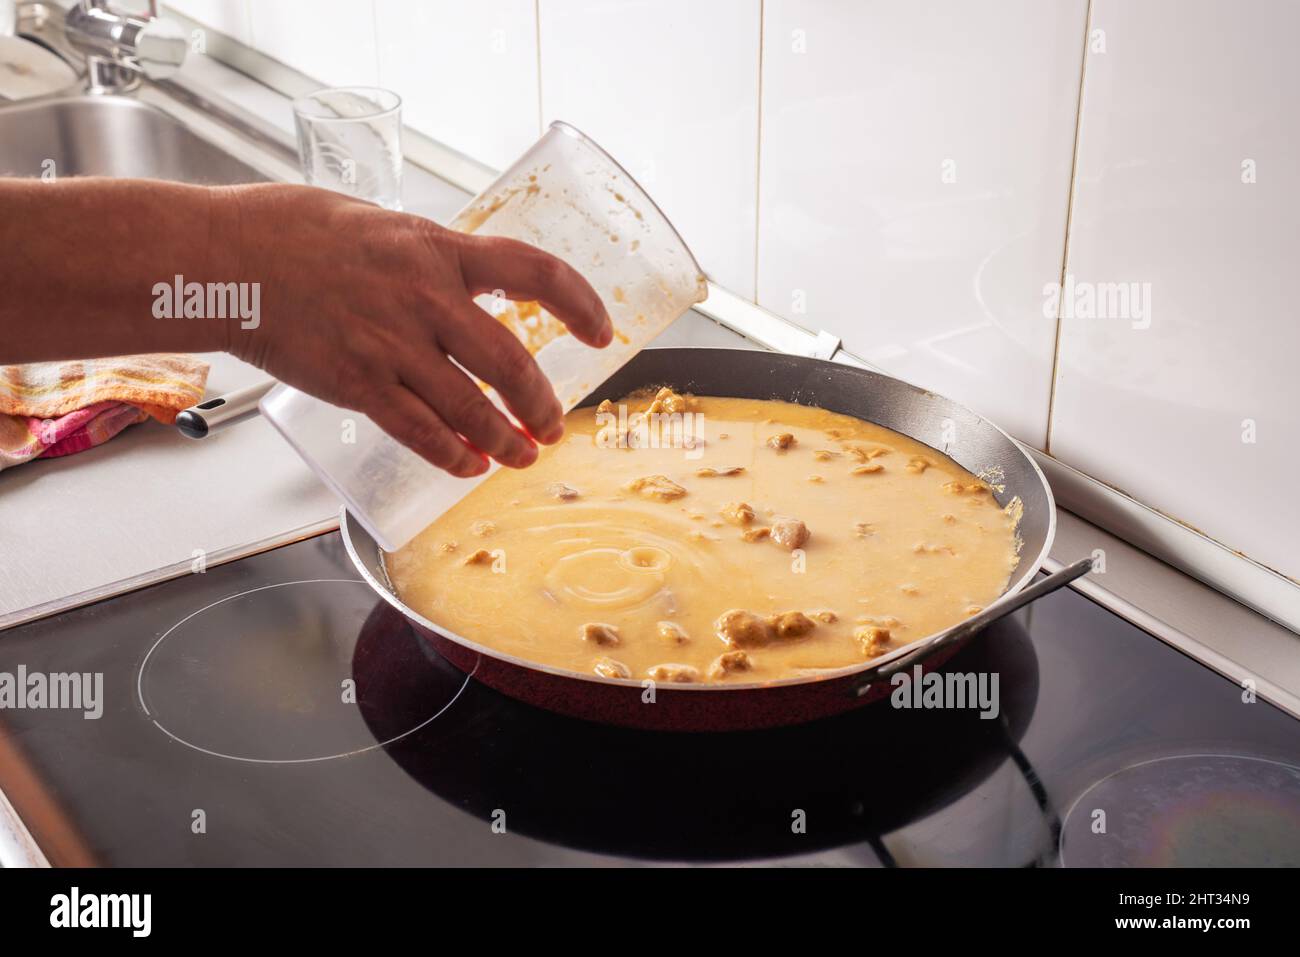 A woman's hand pouring the sauté into the pan to make a paella. Stock Photo